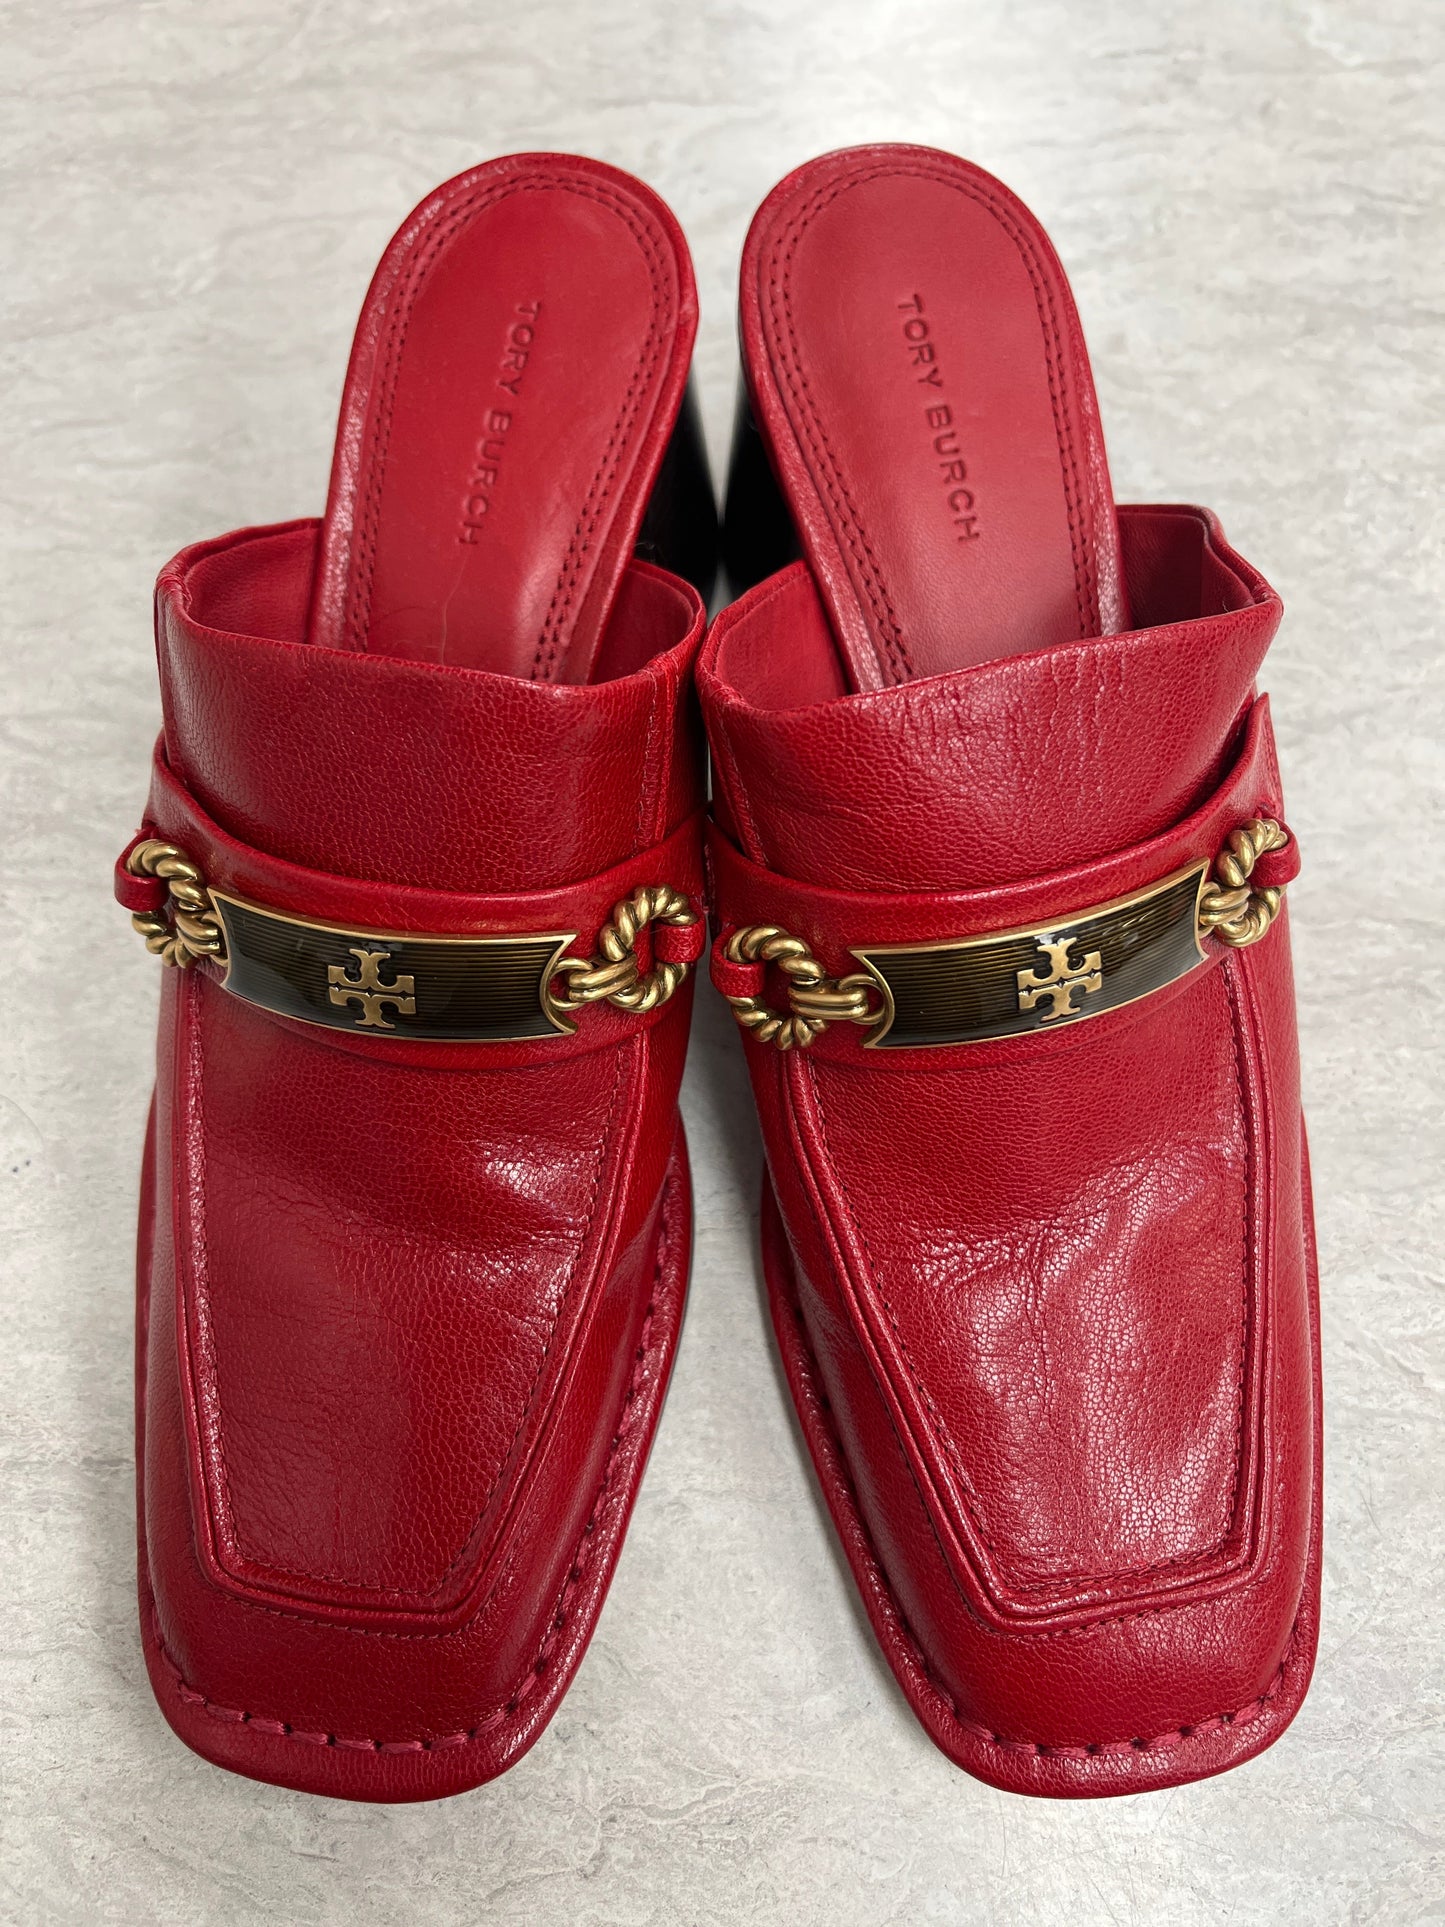 Red Shoes Heels Block Tory Burch, Size 7